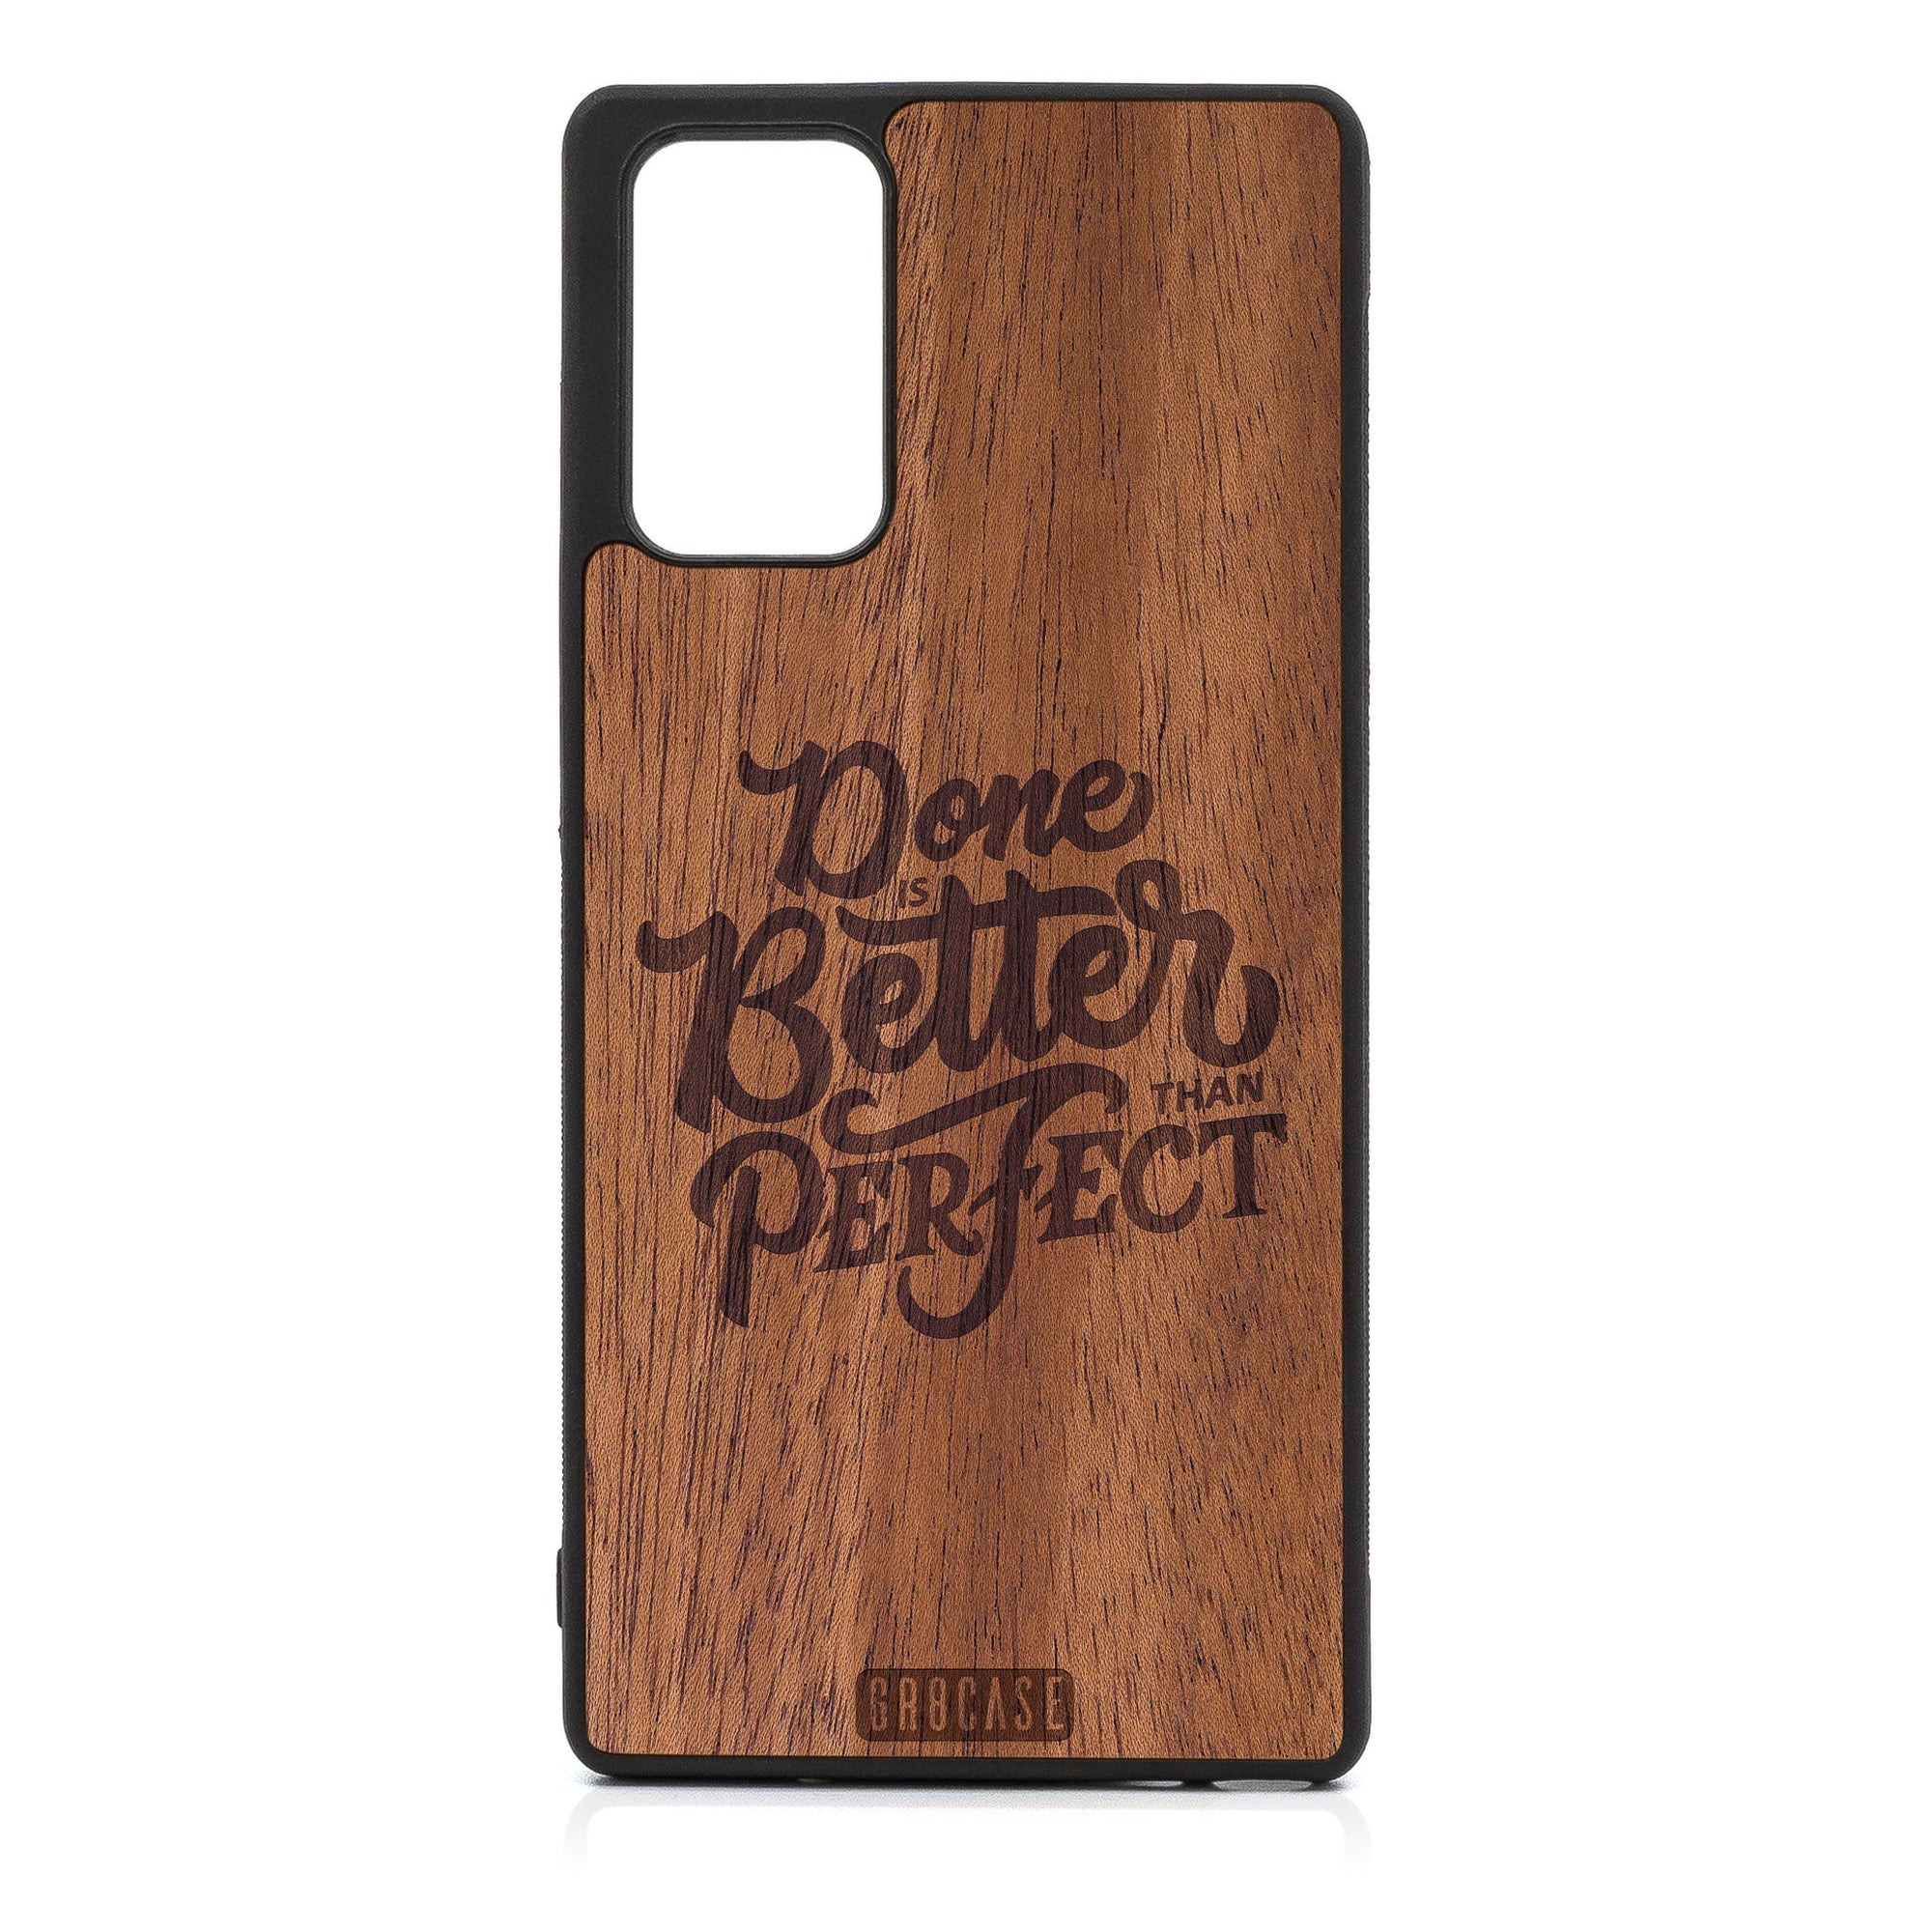 Done Is Better Than Perfect Design Wood Case For Samsung Galaxy A52 5G